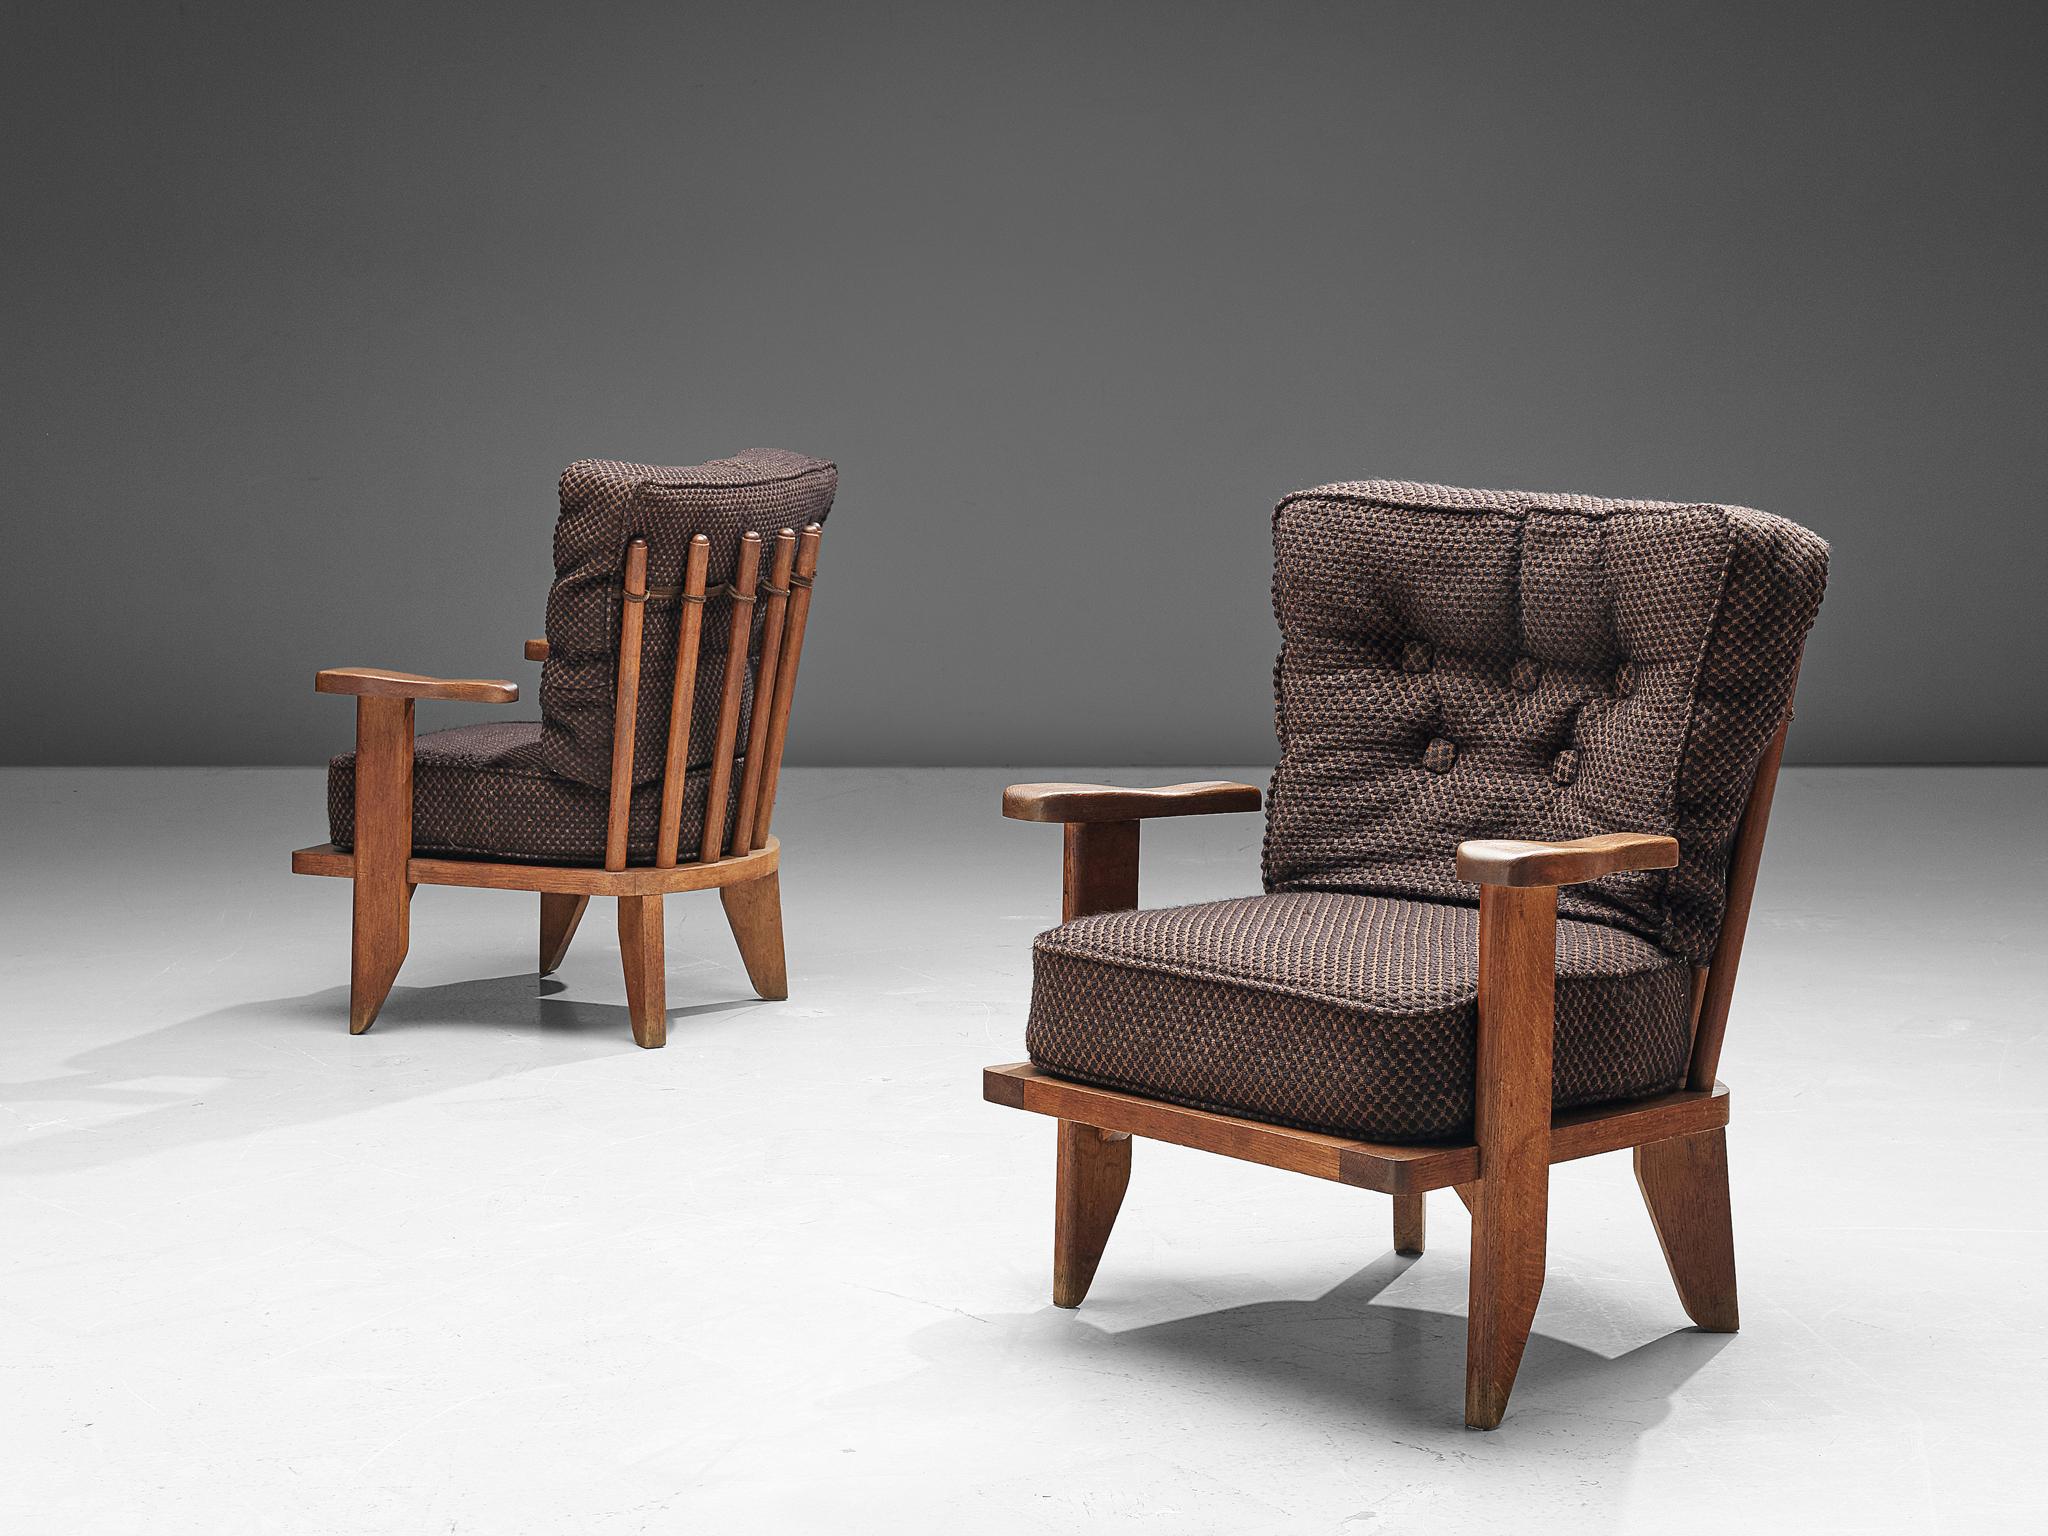 Robert Guillerme & Hervé Chambron for Votre Maison, armchairs, in walnut and fabric upholstery, France, 1960s.

Characteristic lounge chairs by French designer duo Guillerme and Chambron. With the typical spindle back, these easy chairs have a